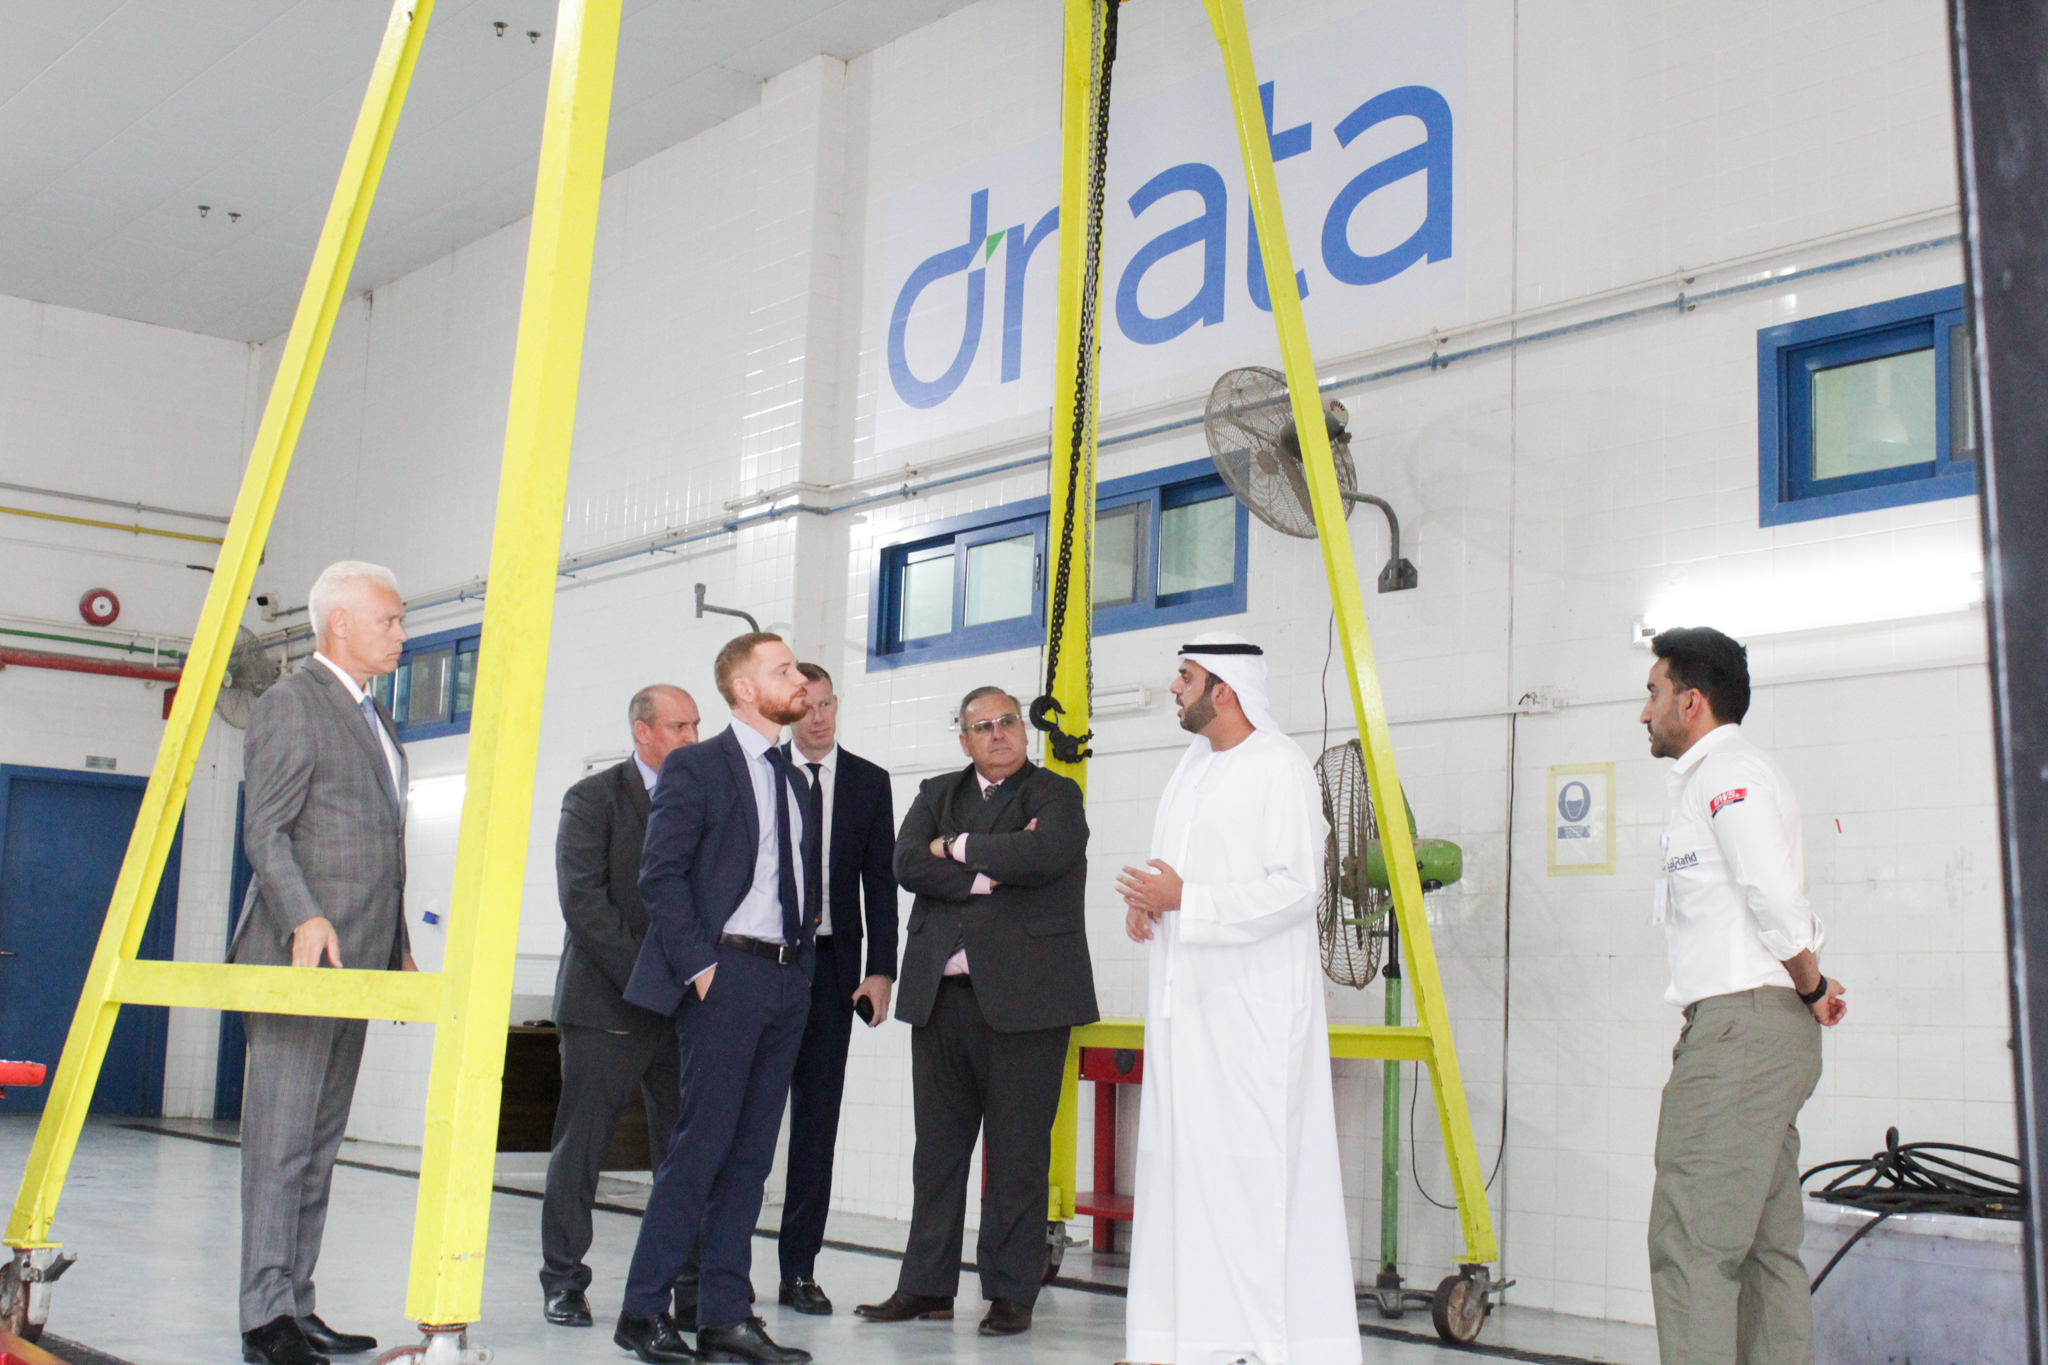 RAFID SIGNS 5 YEAR AGREEMENT WITH dnata